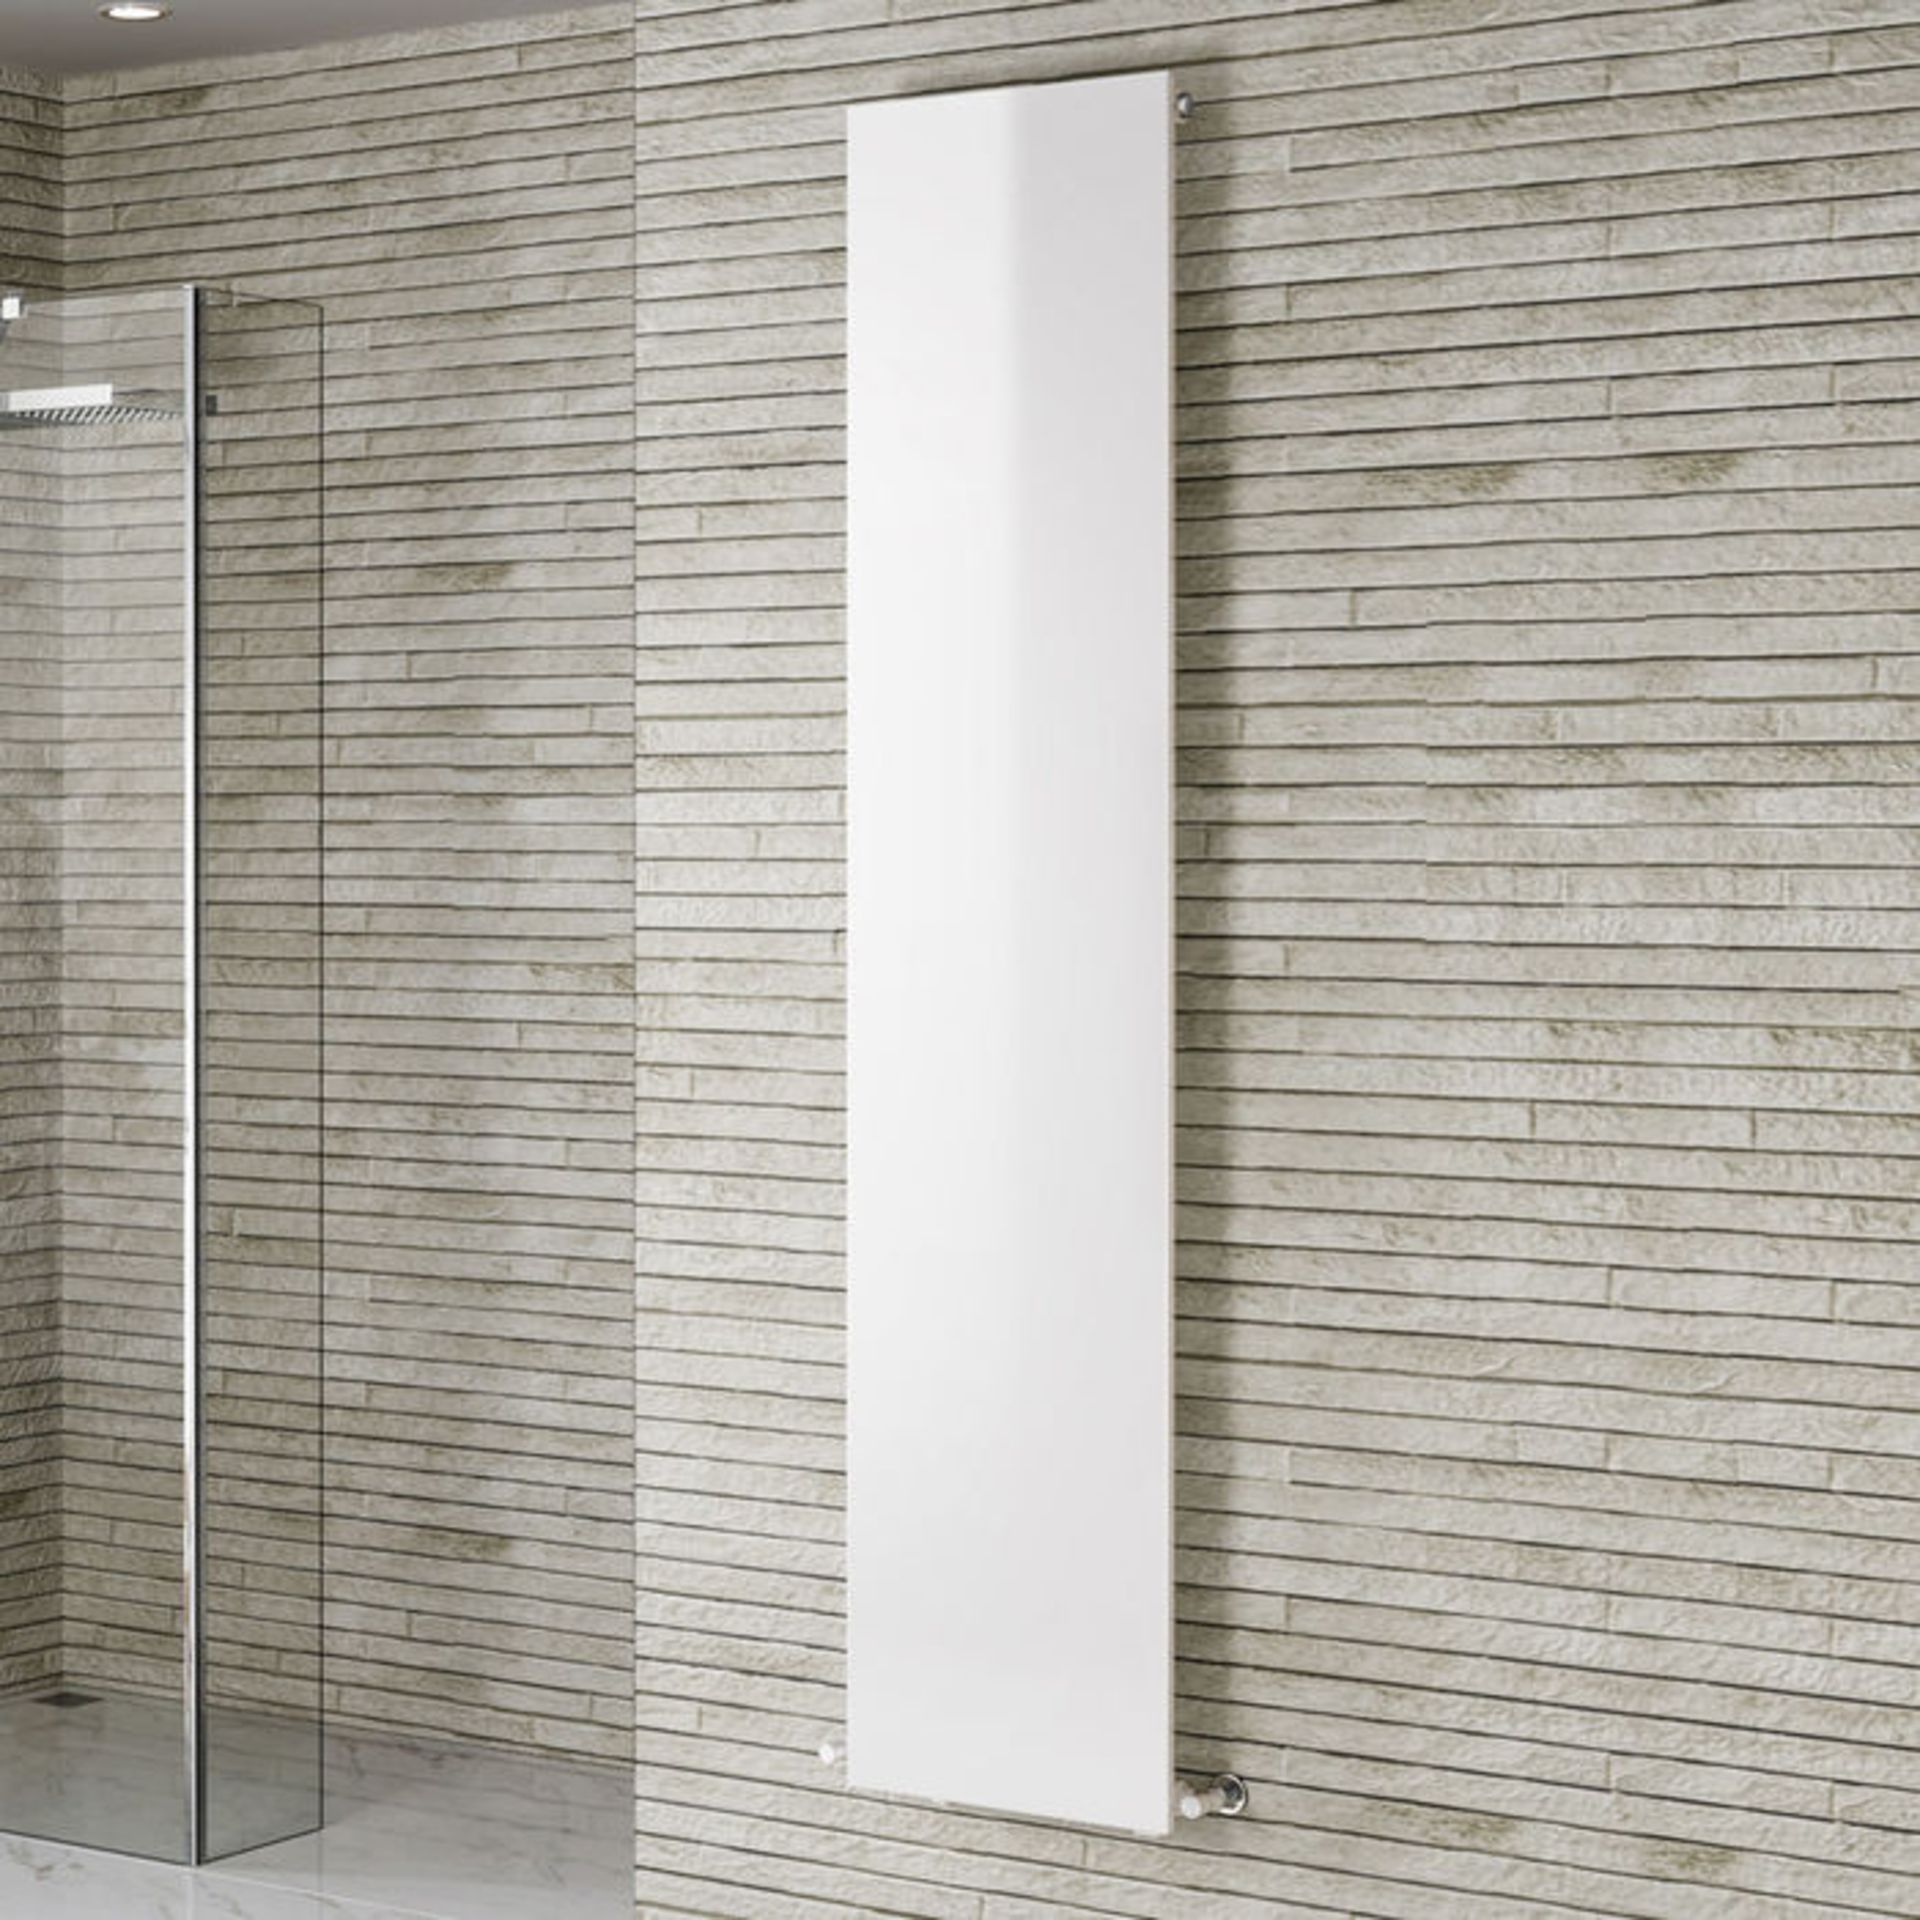 (L73) 1800x380 Ultra Slim White Radiator. RRP £399.99. Tested to BS EN 442 standards Complies with - Image 2 of 3